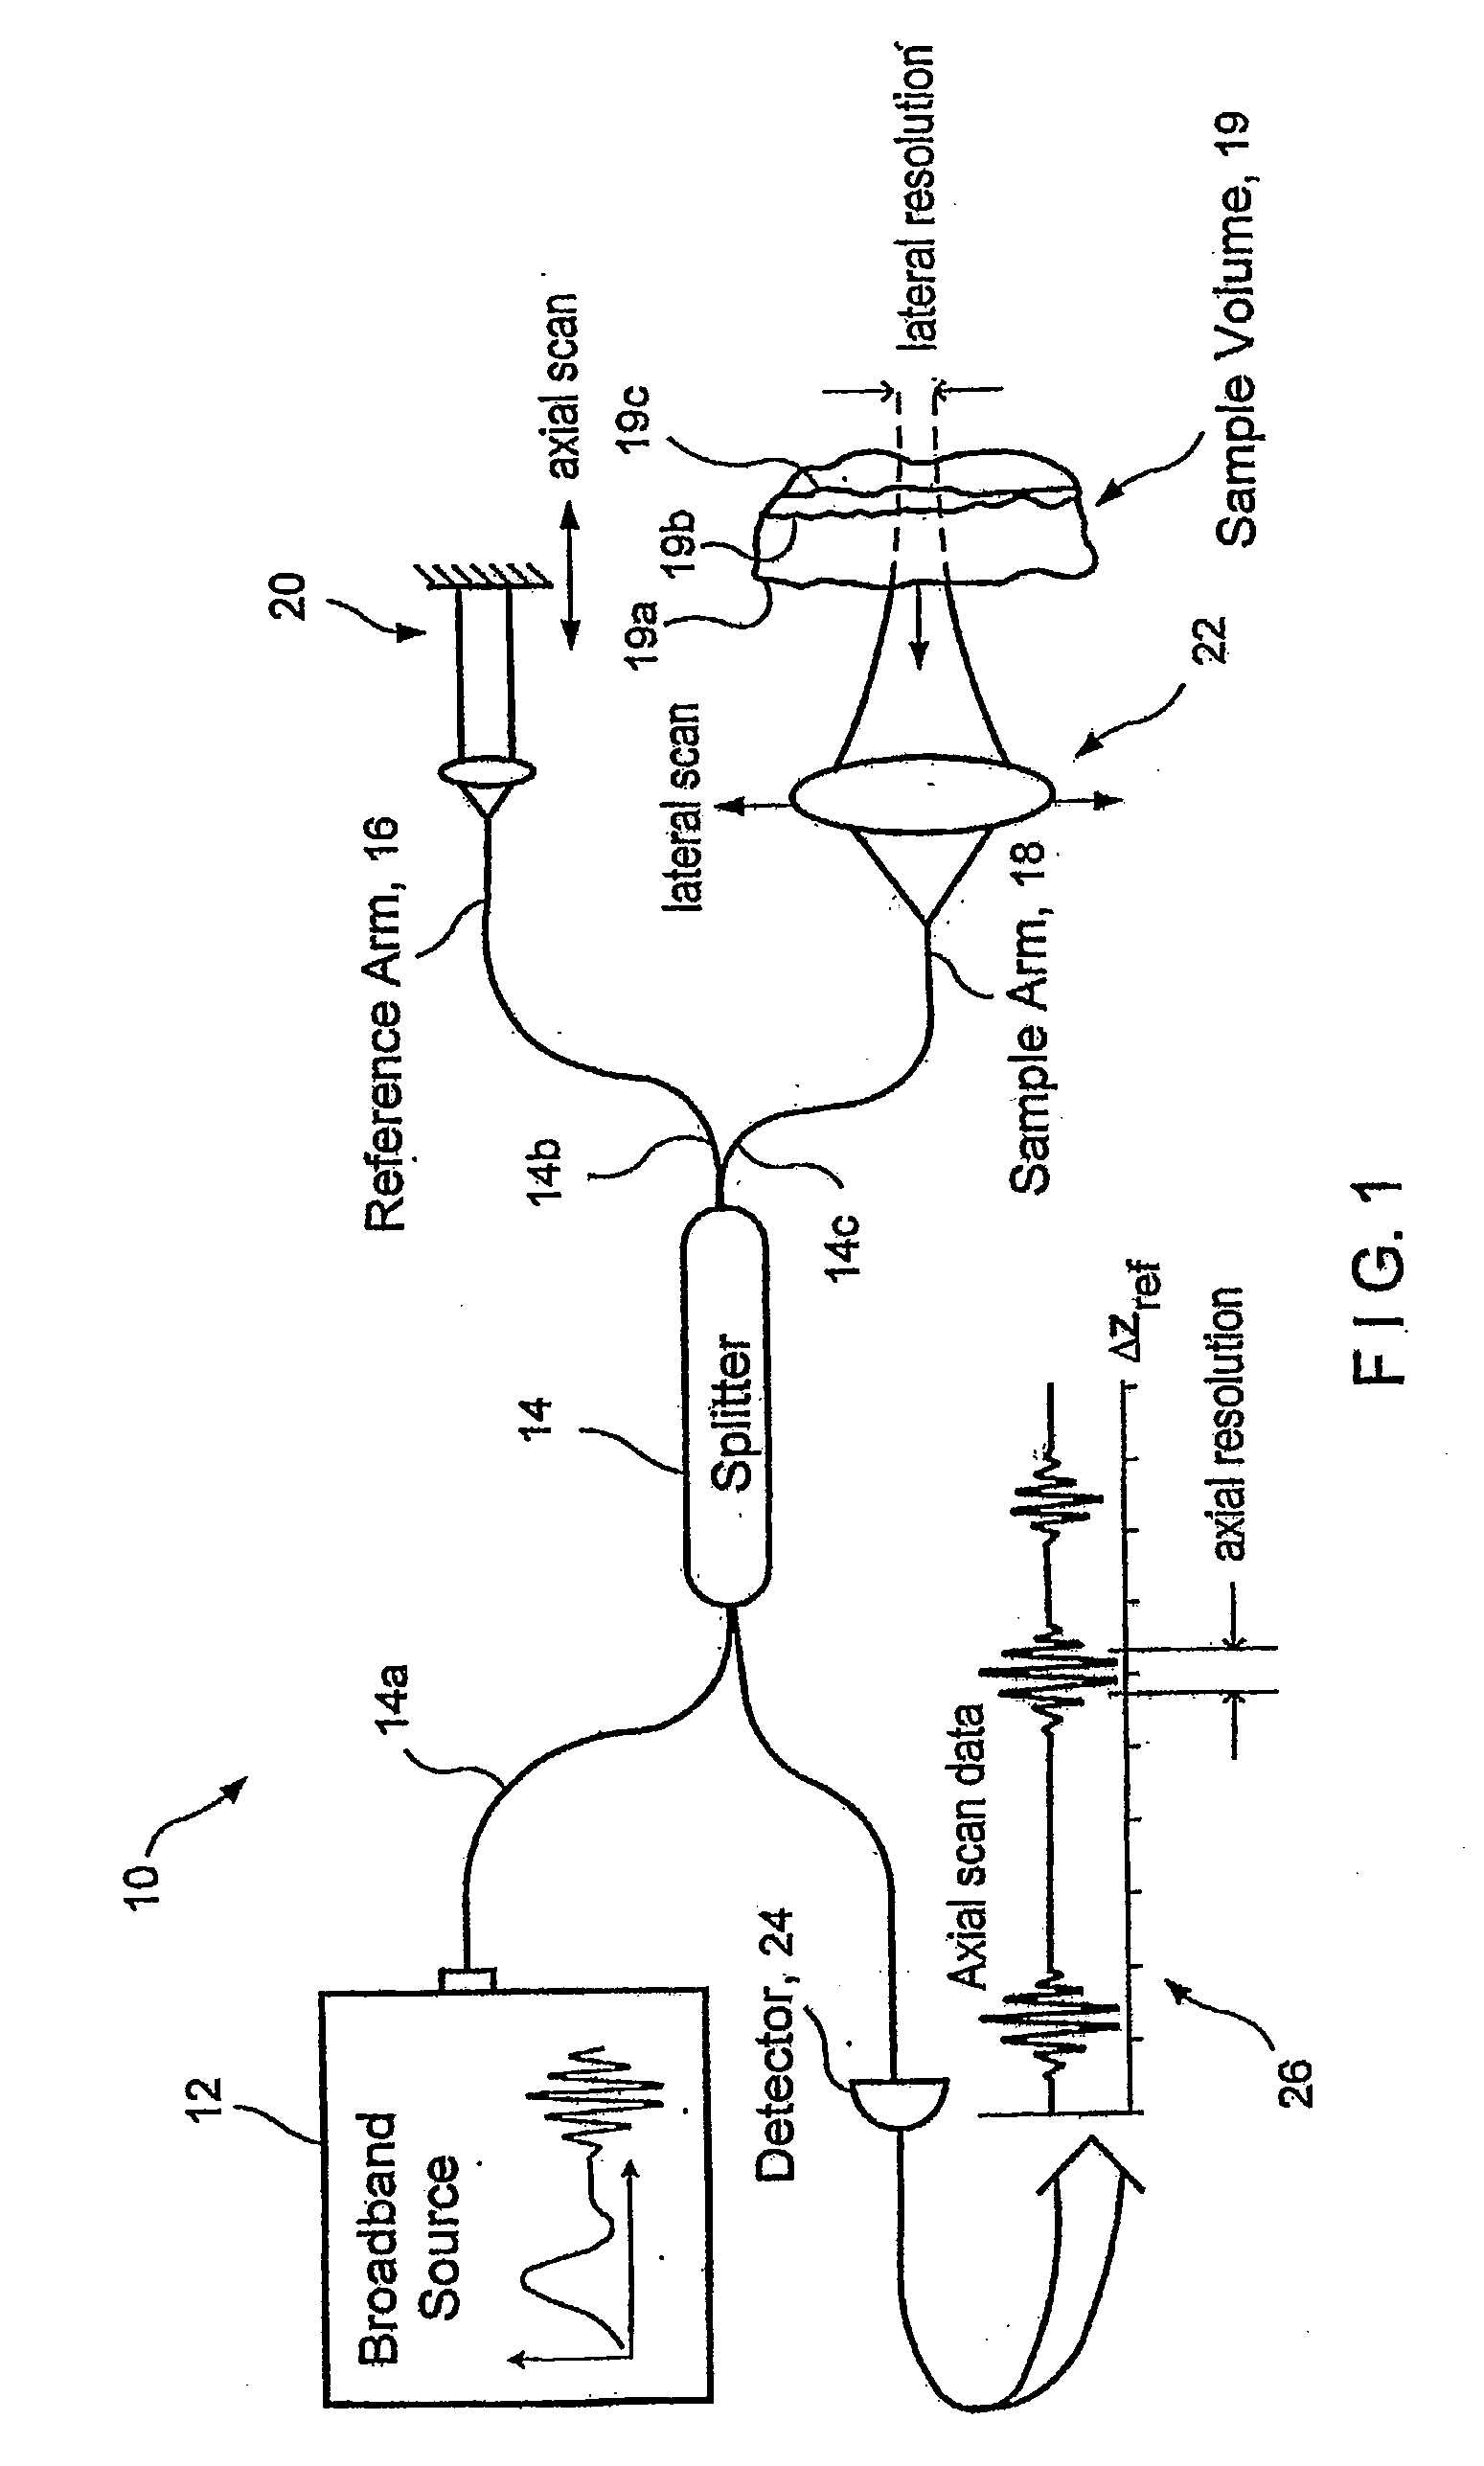 Method and apparatus for performing optical imaging using frequency-domain interferometry